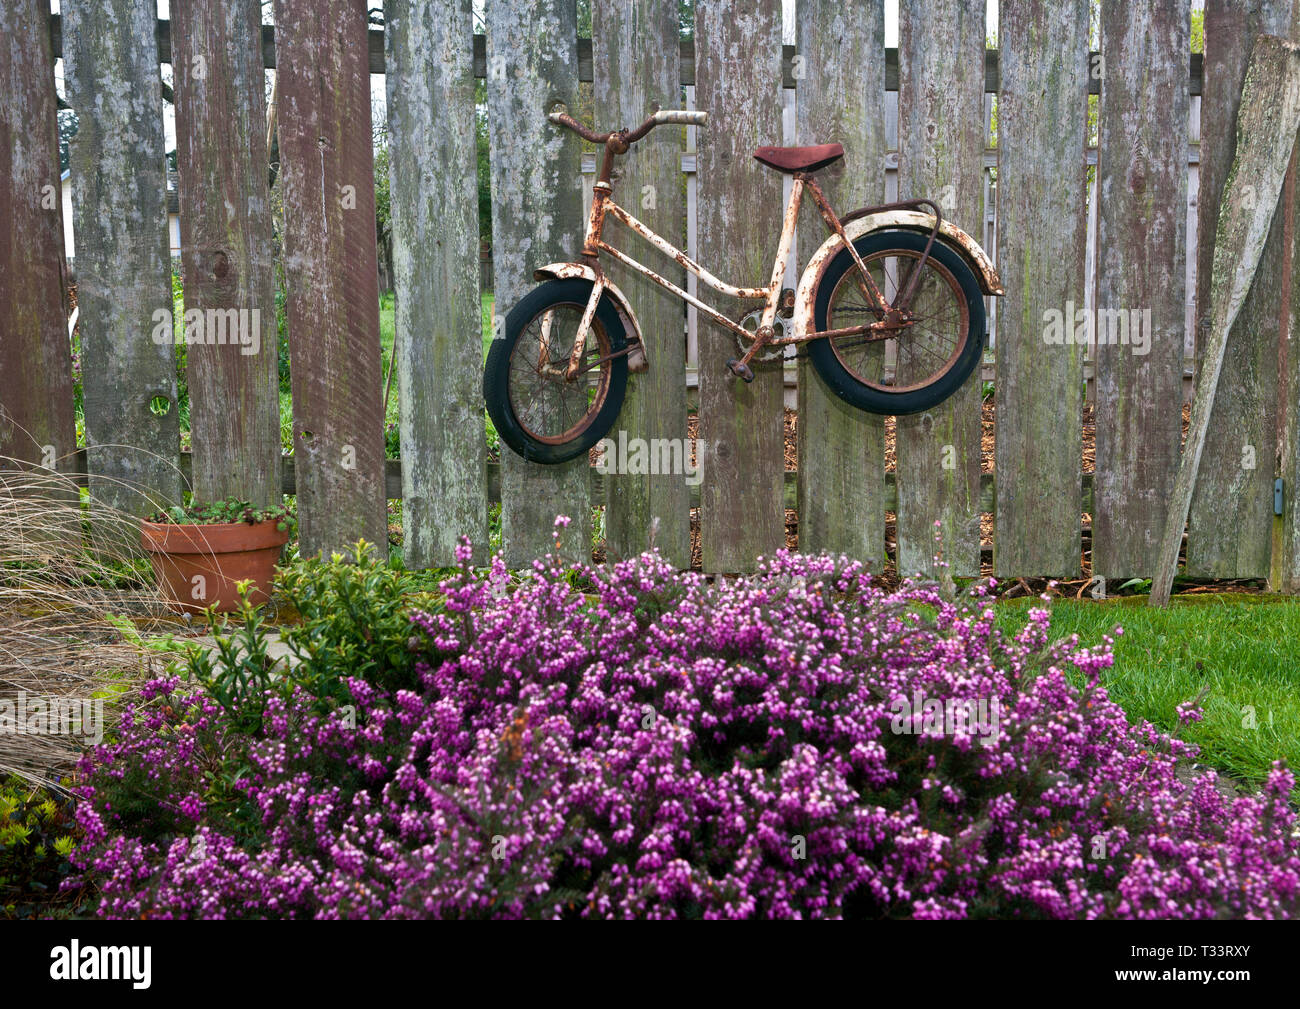 WA06522-00...WASHINGTON - Bicycle on a fence in the town of Eastsound on Orcas Island. Stock Photo